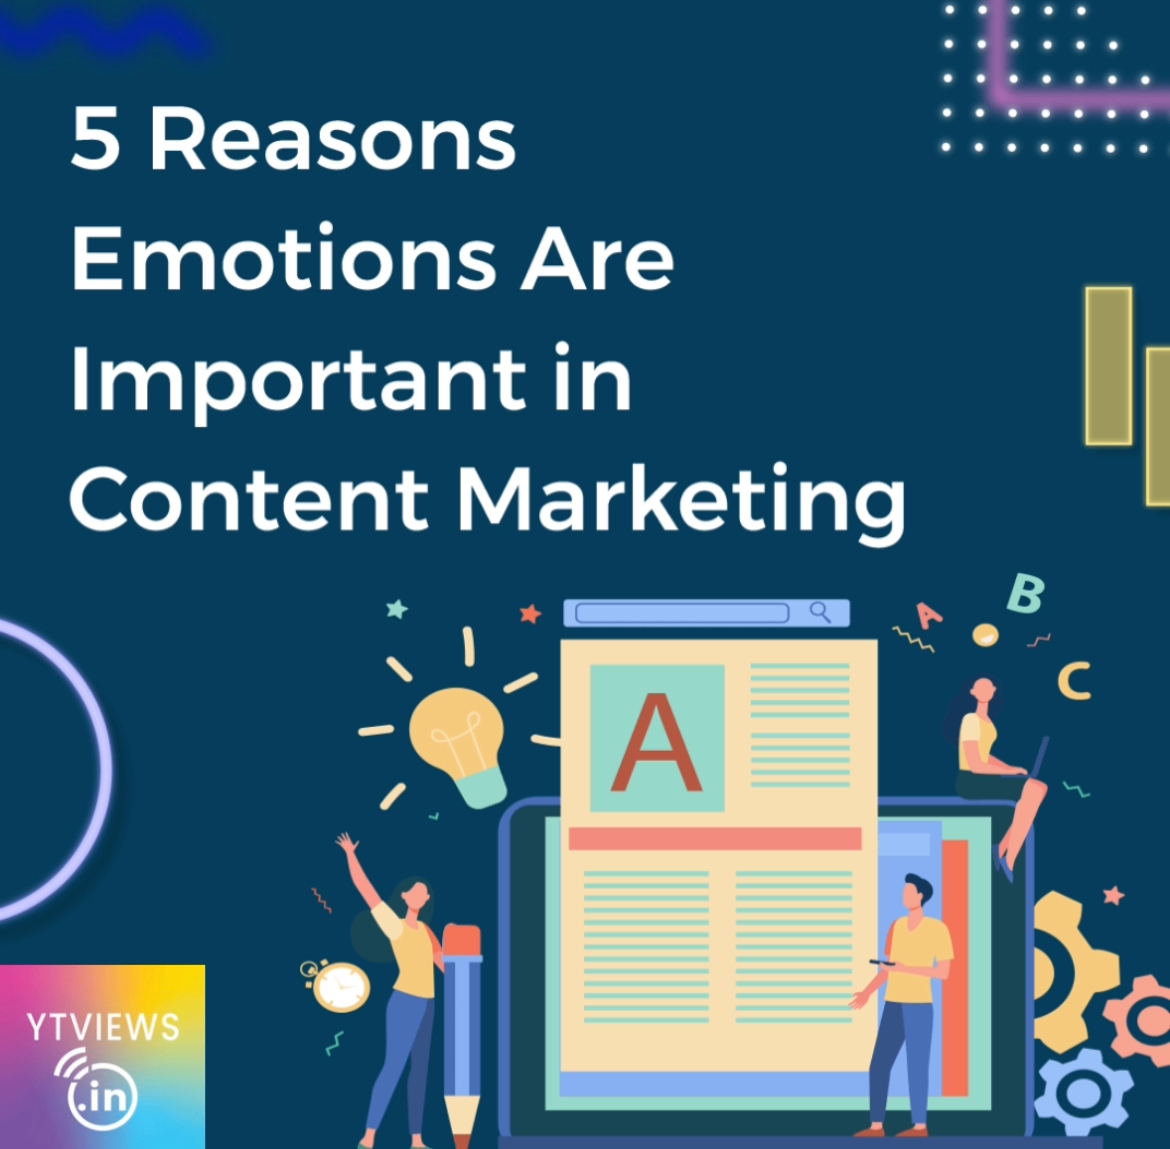 How do emotions play a crucial role in content marketing?